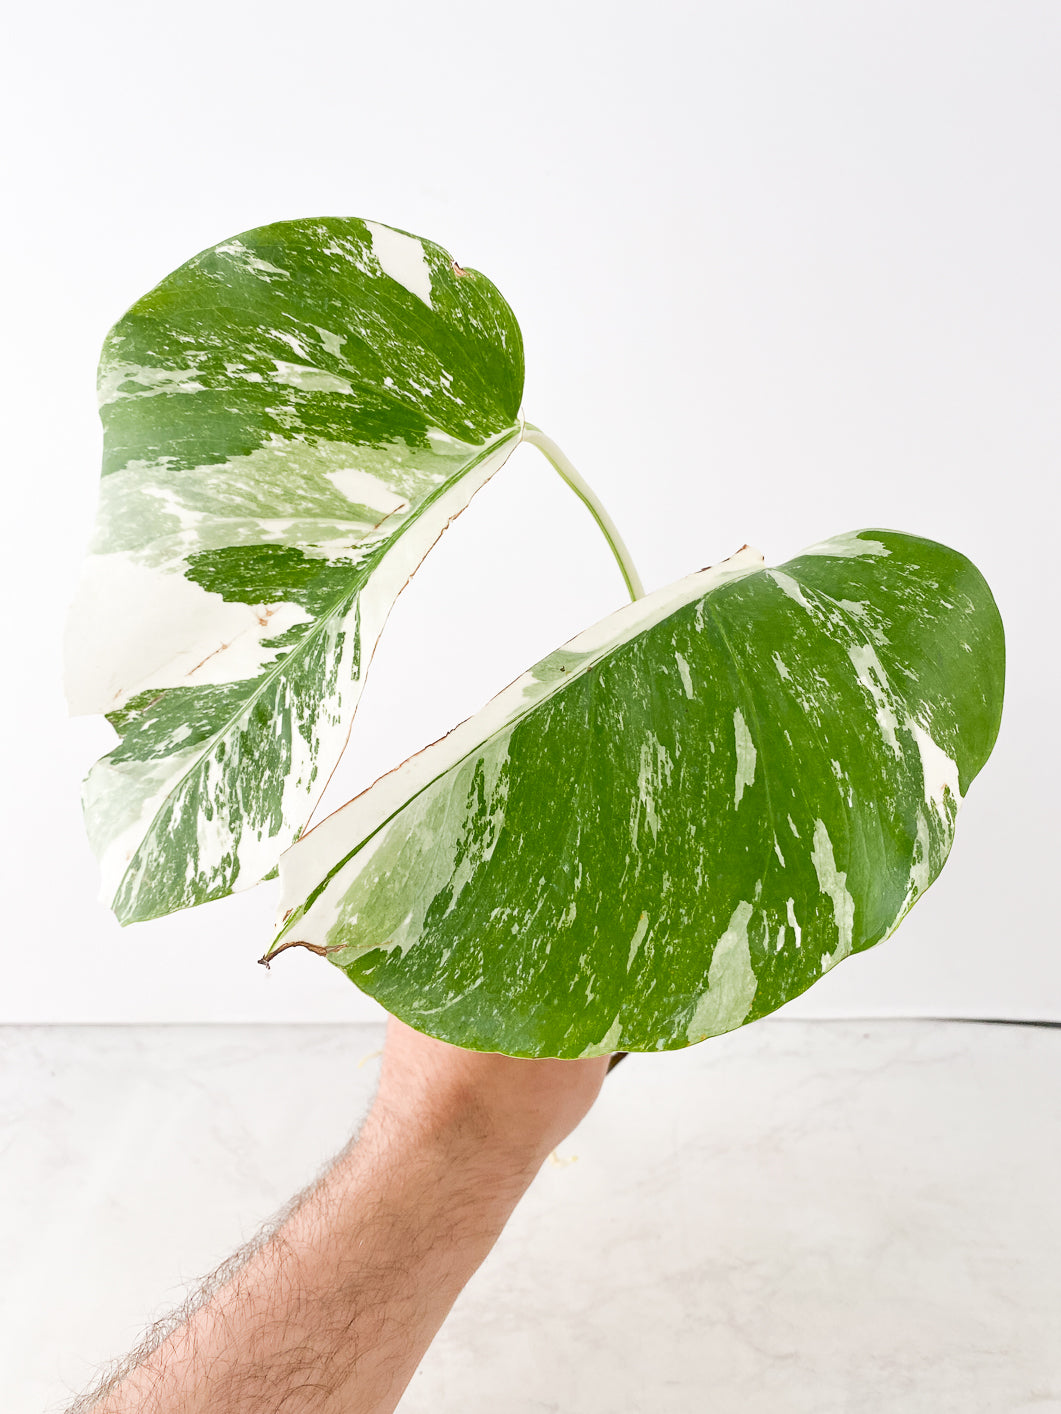 Monstera Albo White Tiger 2 leaves slightly rooted